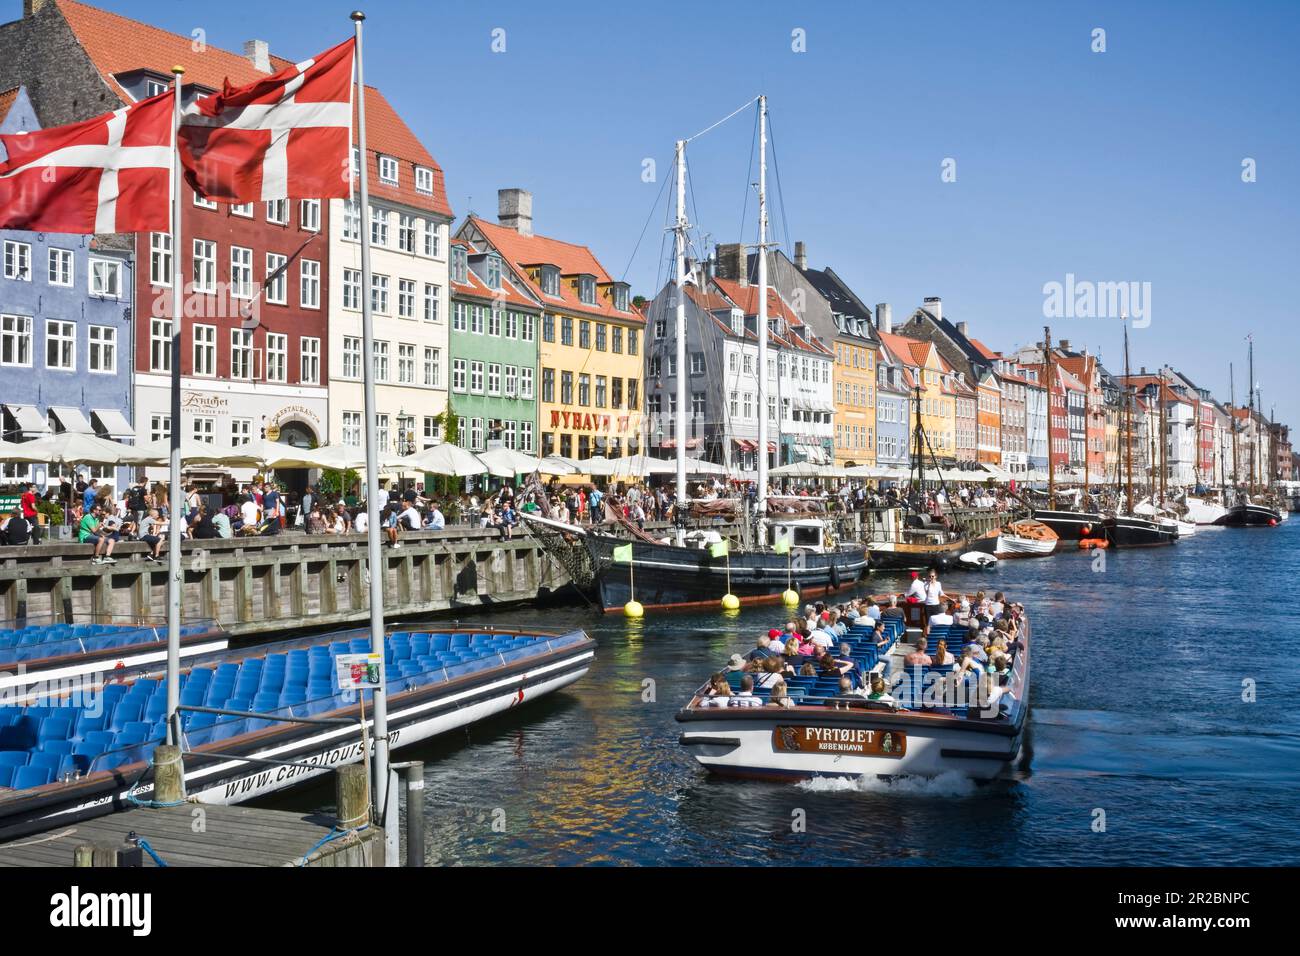 Canal tours at the landmark Nyhavn at Copenhagen, Denmark is a tourist sightseeing tradition Stock Photo